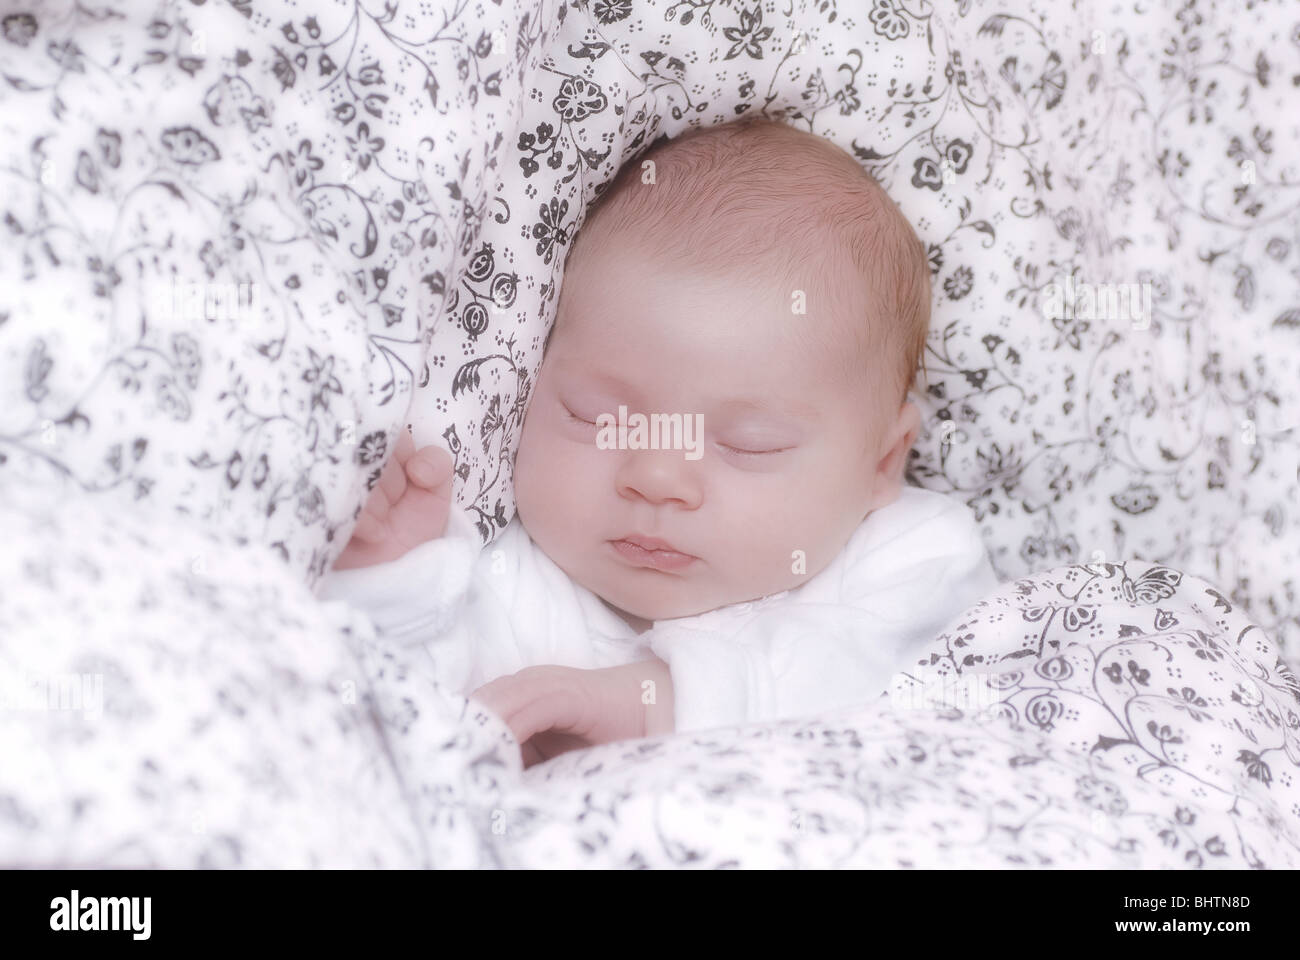 BABY ASLEEP IN A BED Stock Photo